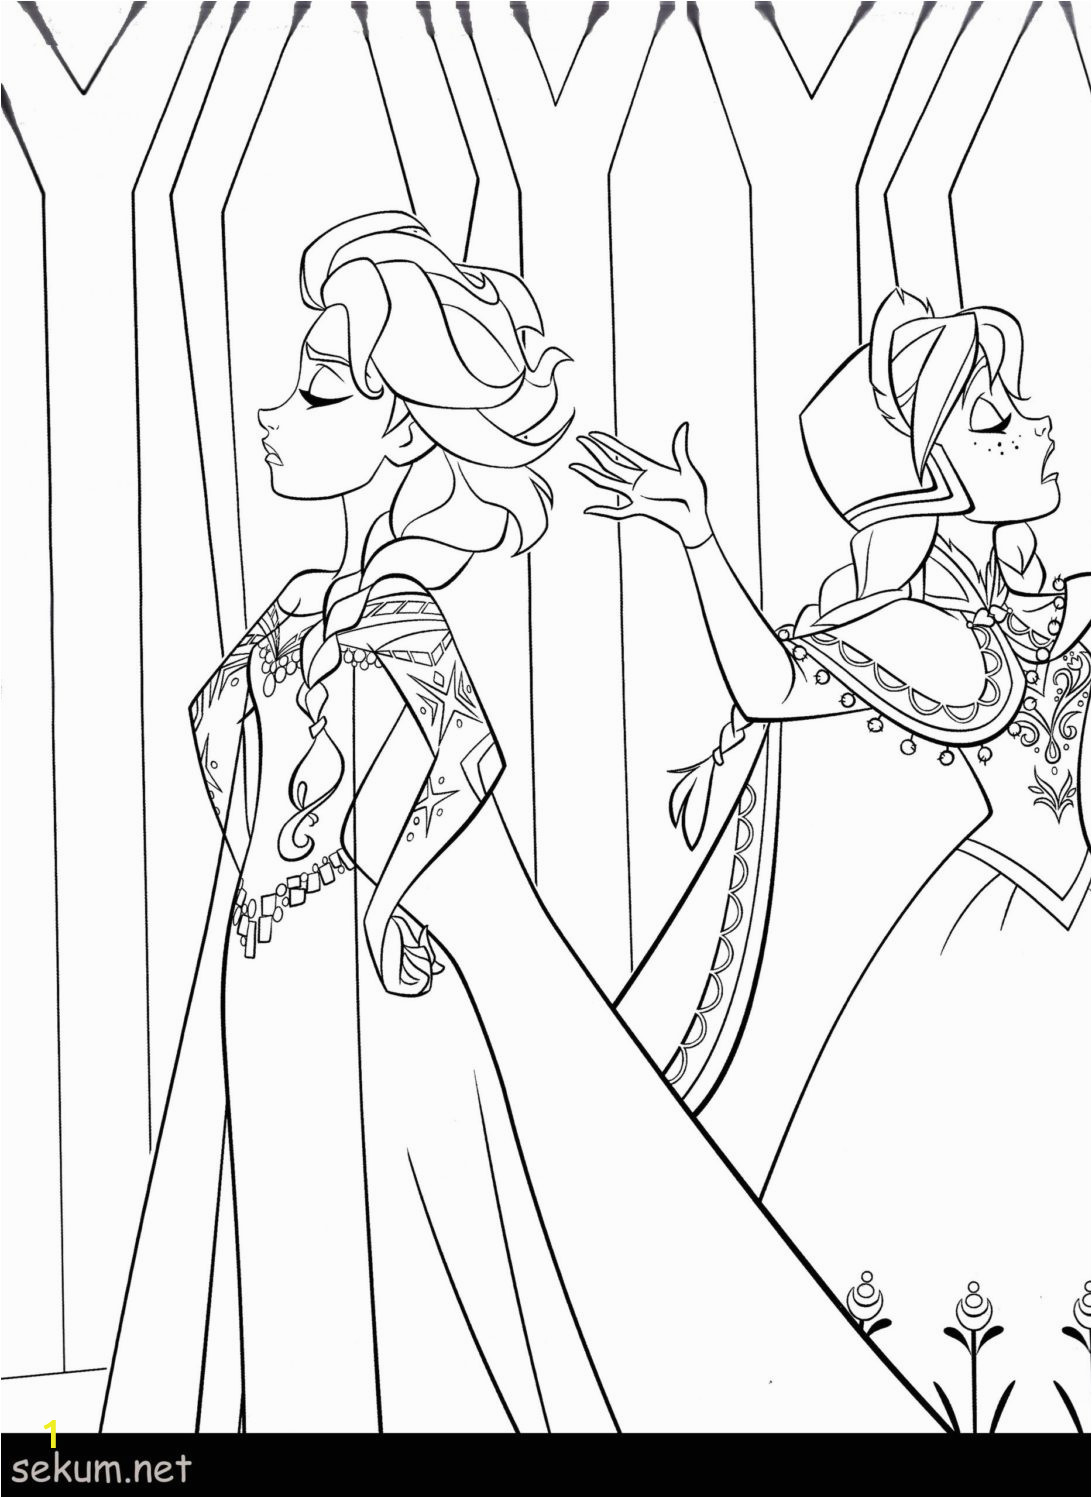 fabulous free printable frozen coloring pages ideas disneytle copy for kids elsa colouring to print disney castle and anna sheet sheets pictures printables princess 1092x1498